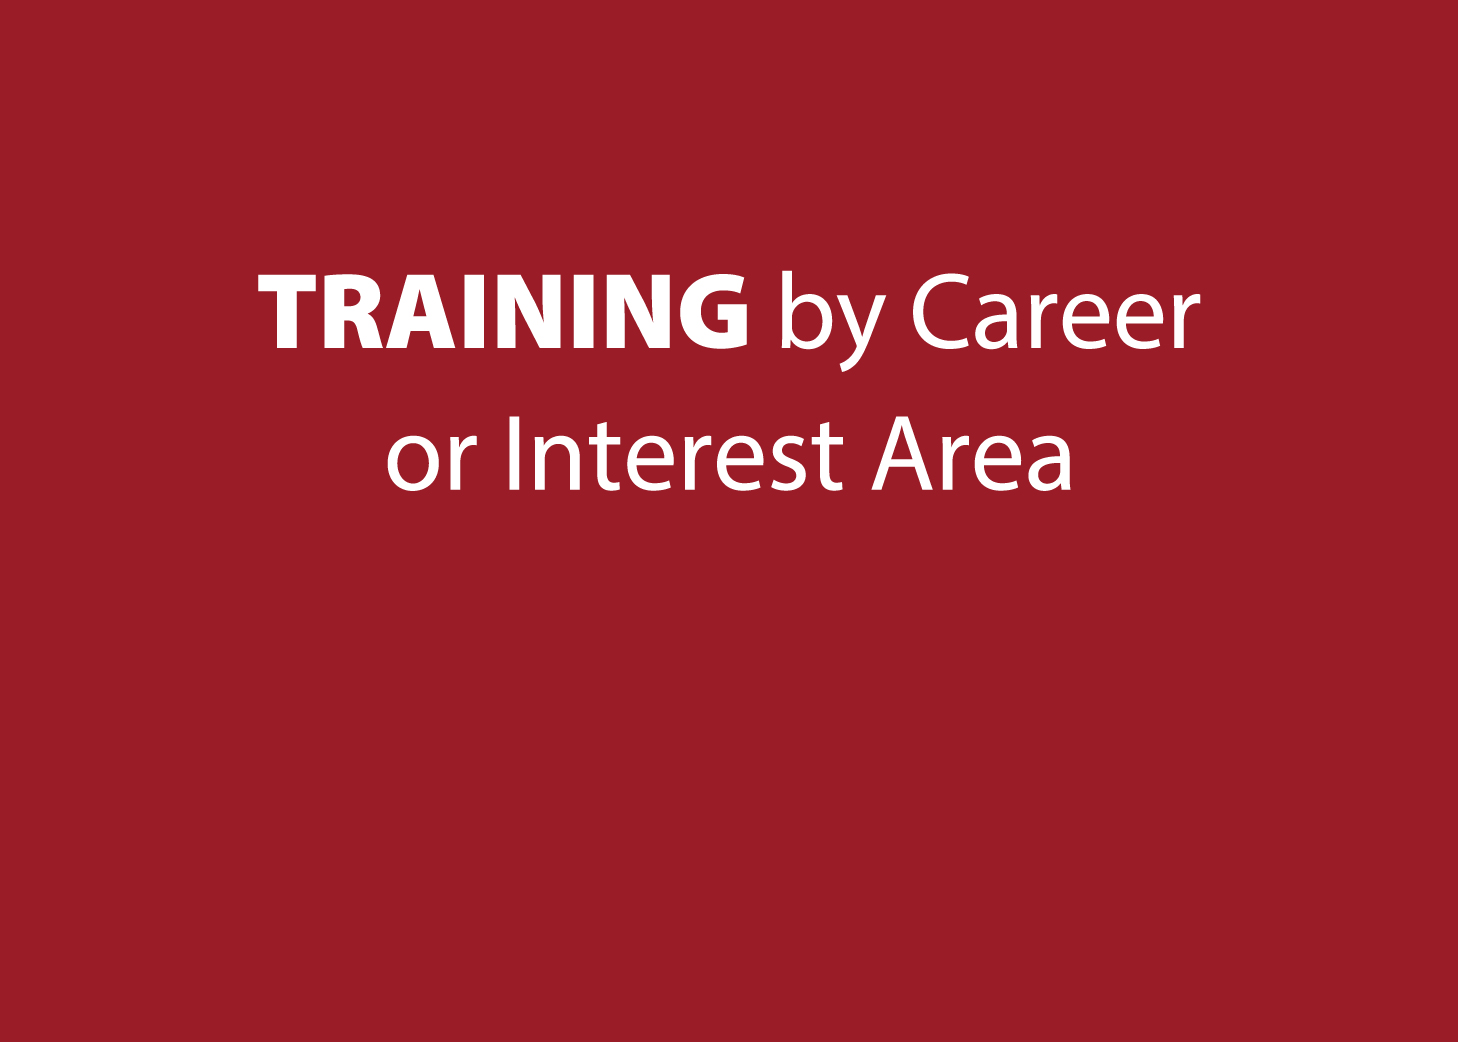 Training by Career or Interest Area